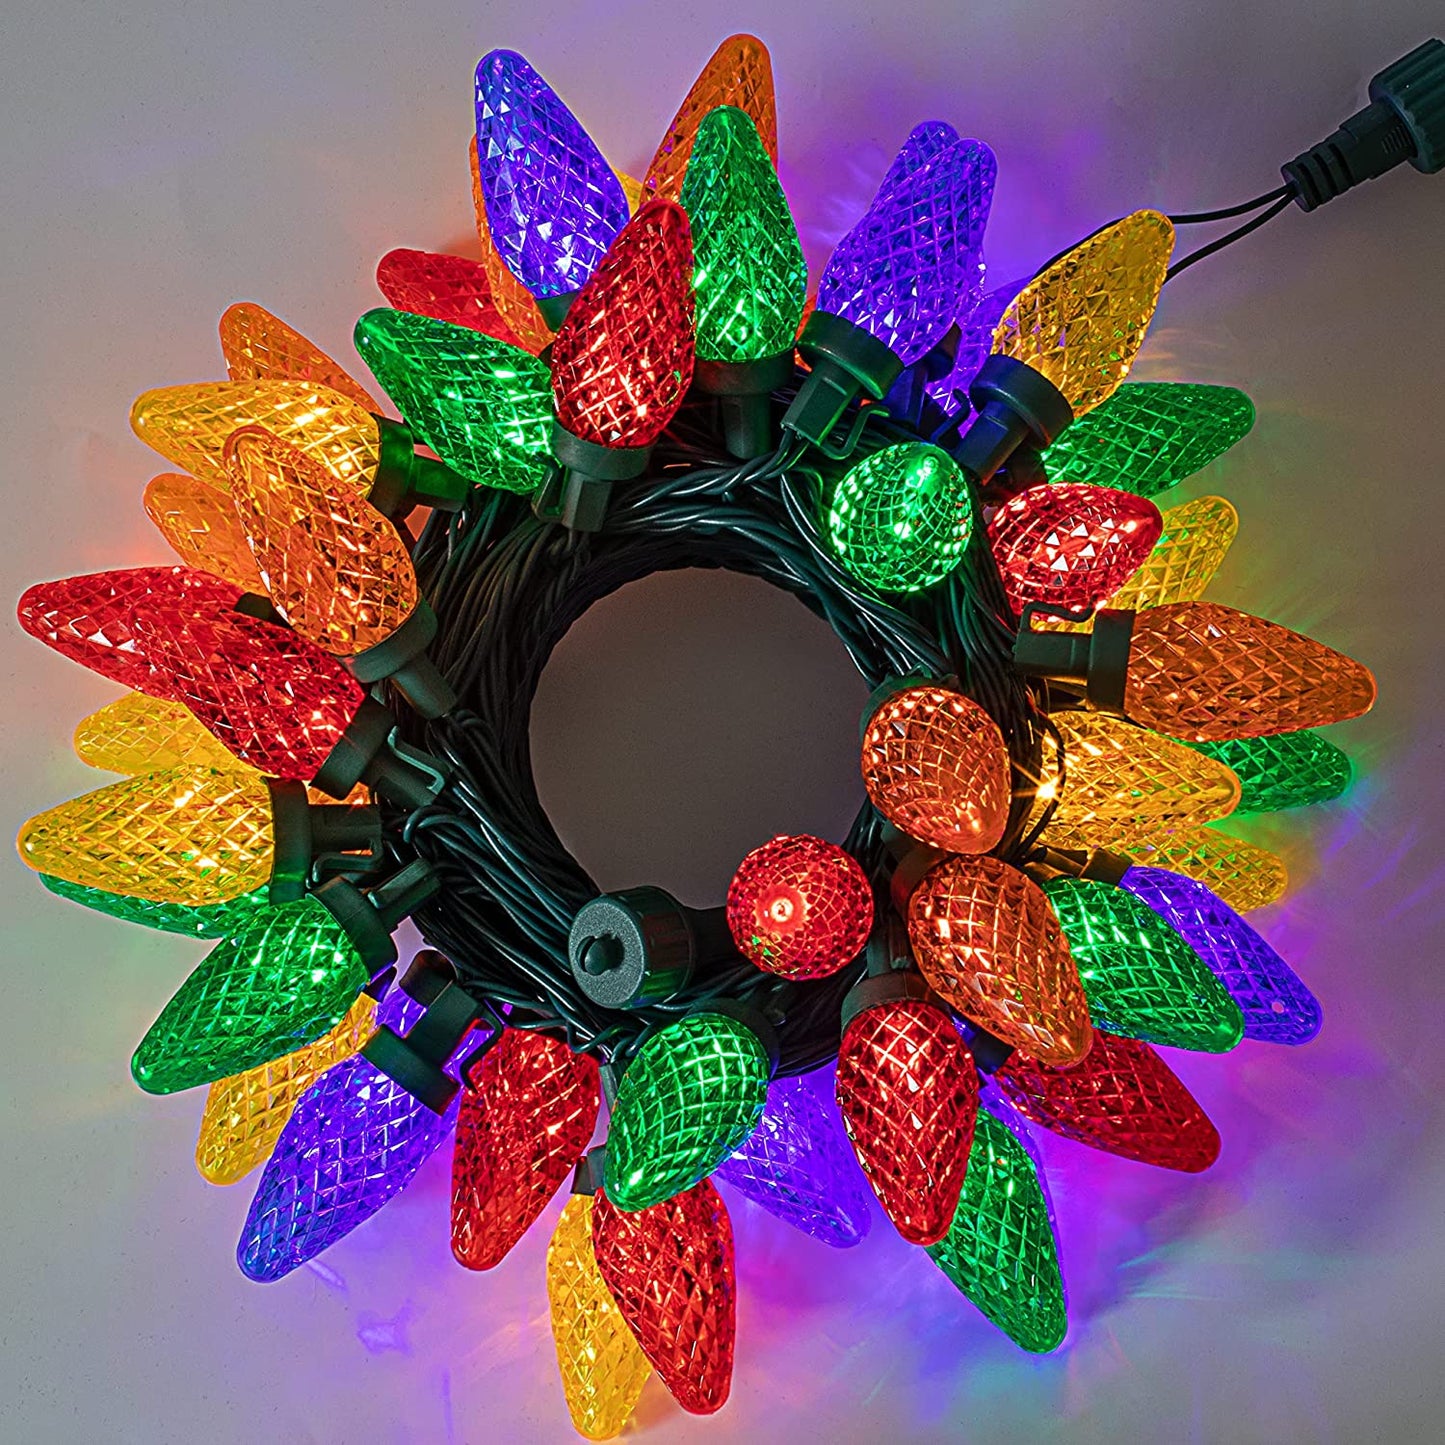 4 x 25 Count Christmas Multicolor String Lights